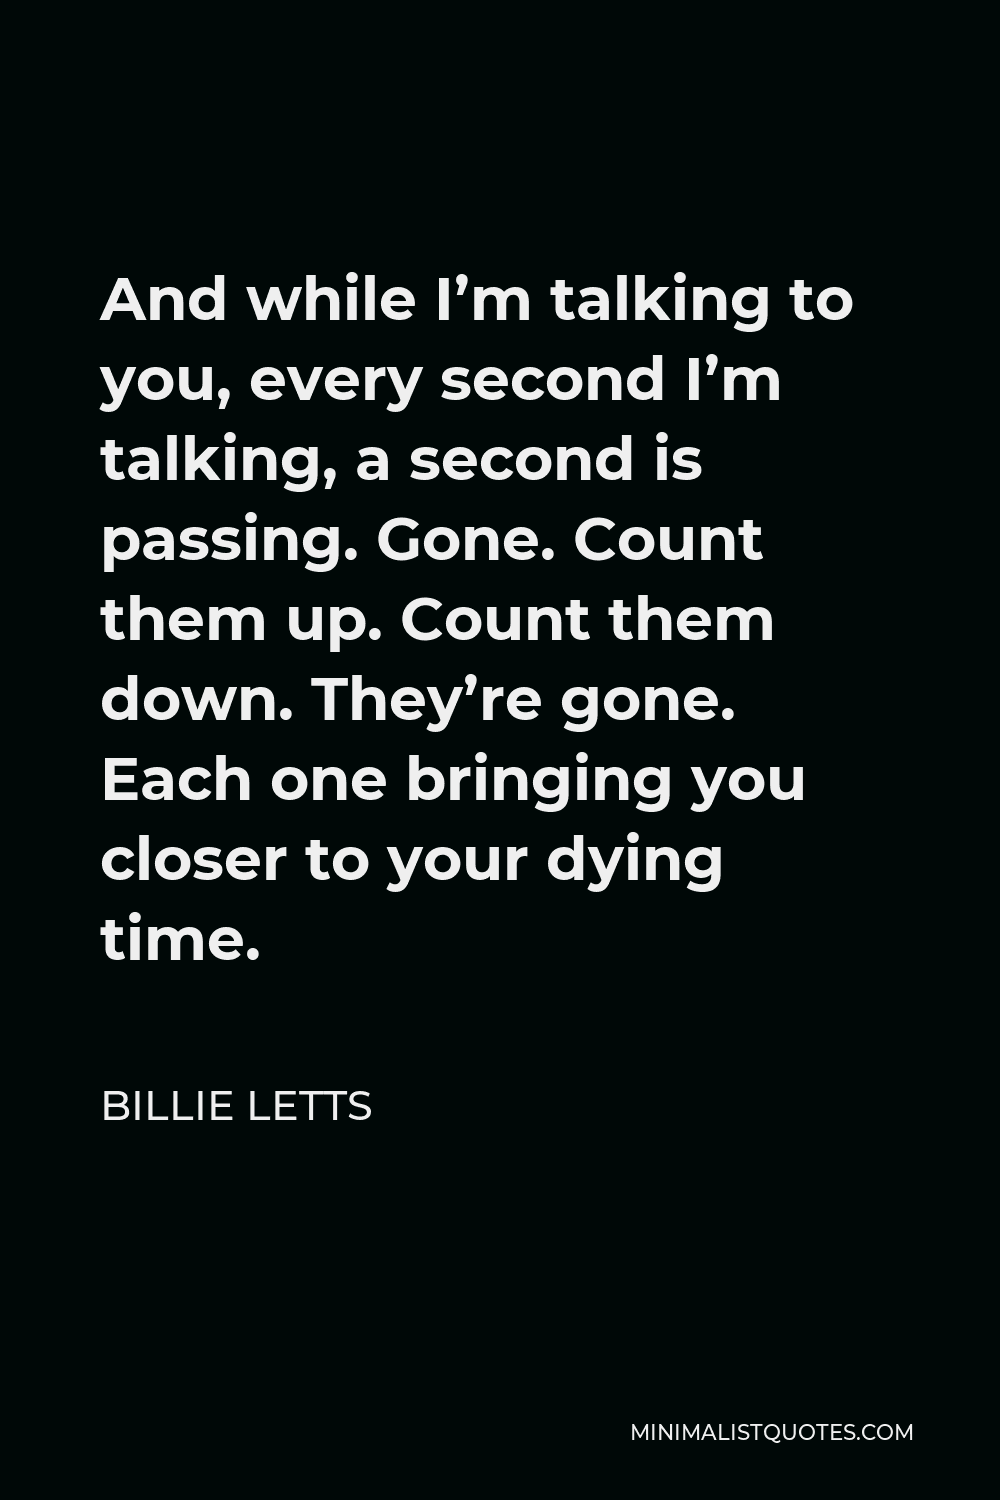 Billie Letts Quote - And while I’m talking to you, every second I’m talking, a second is passing. Gone. Count them up. Count them down. They’re gone. Each one bringing you closer to your dying time.